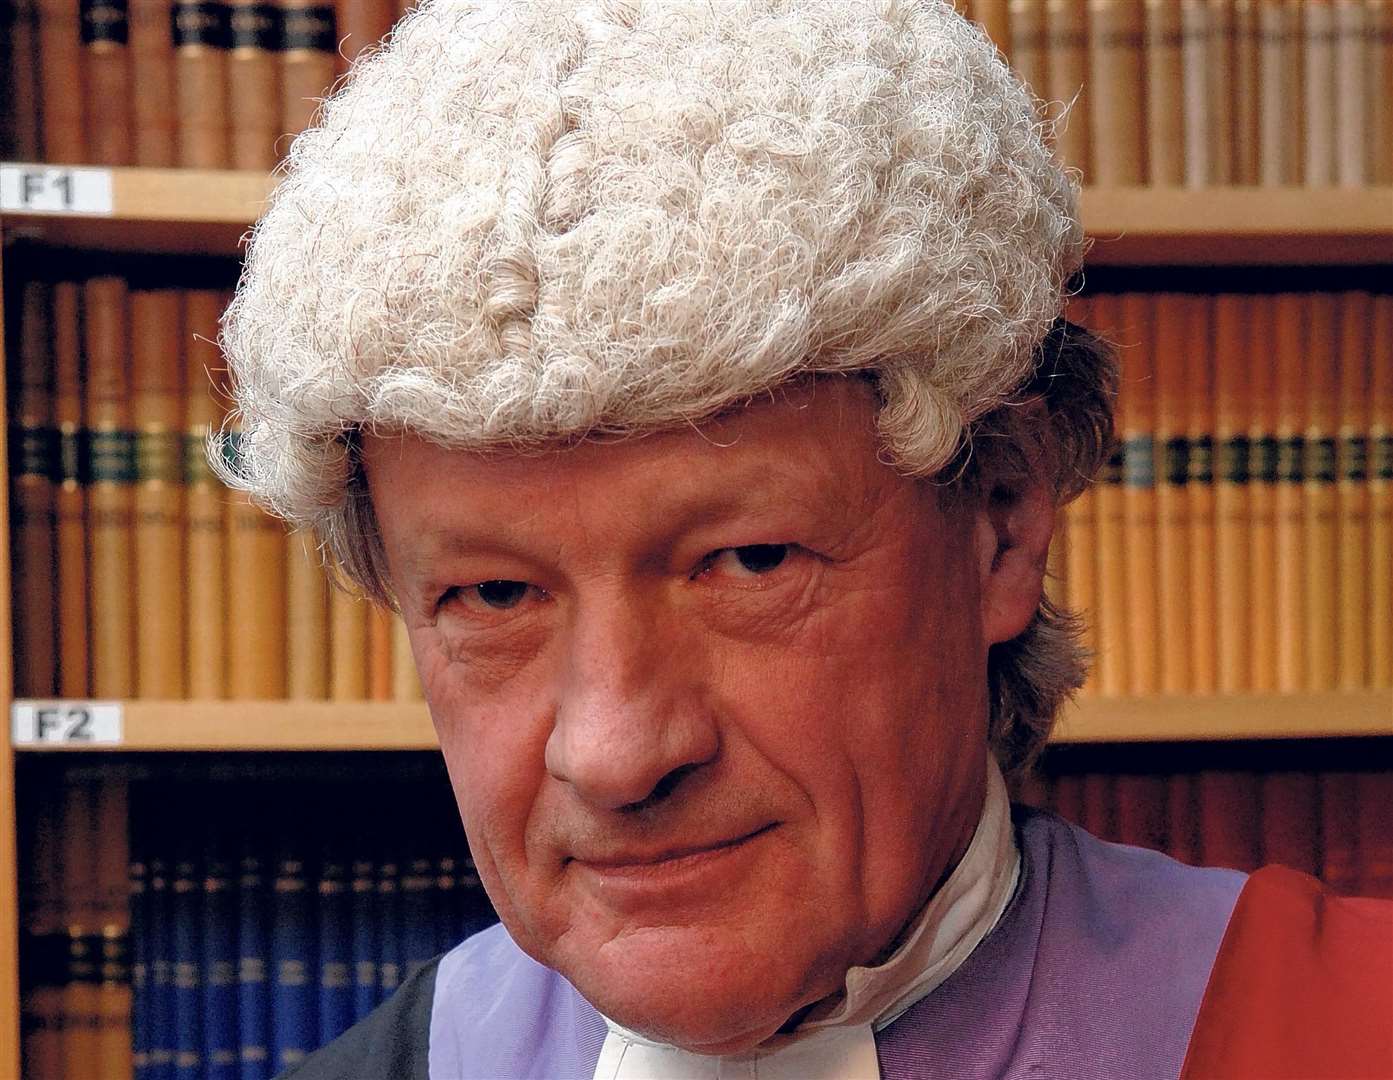 Judge James O'Mahony warned Collins he faces a life sentence if he repeat his sex assaults